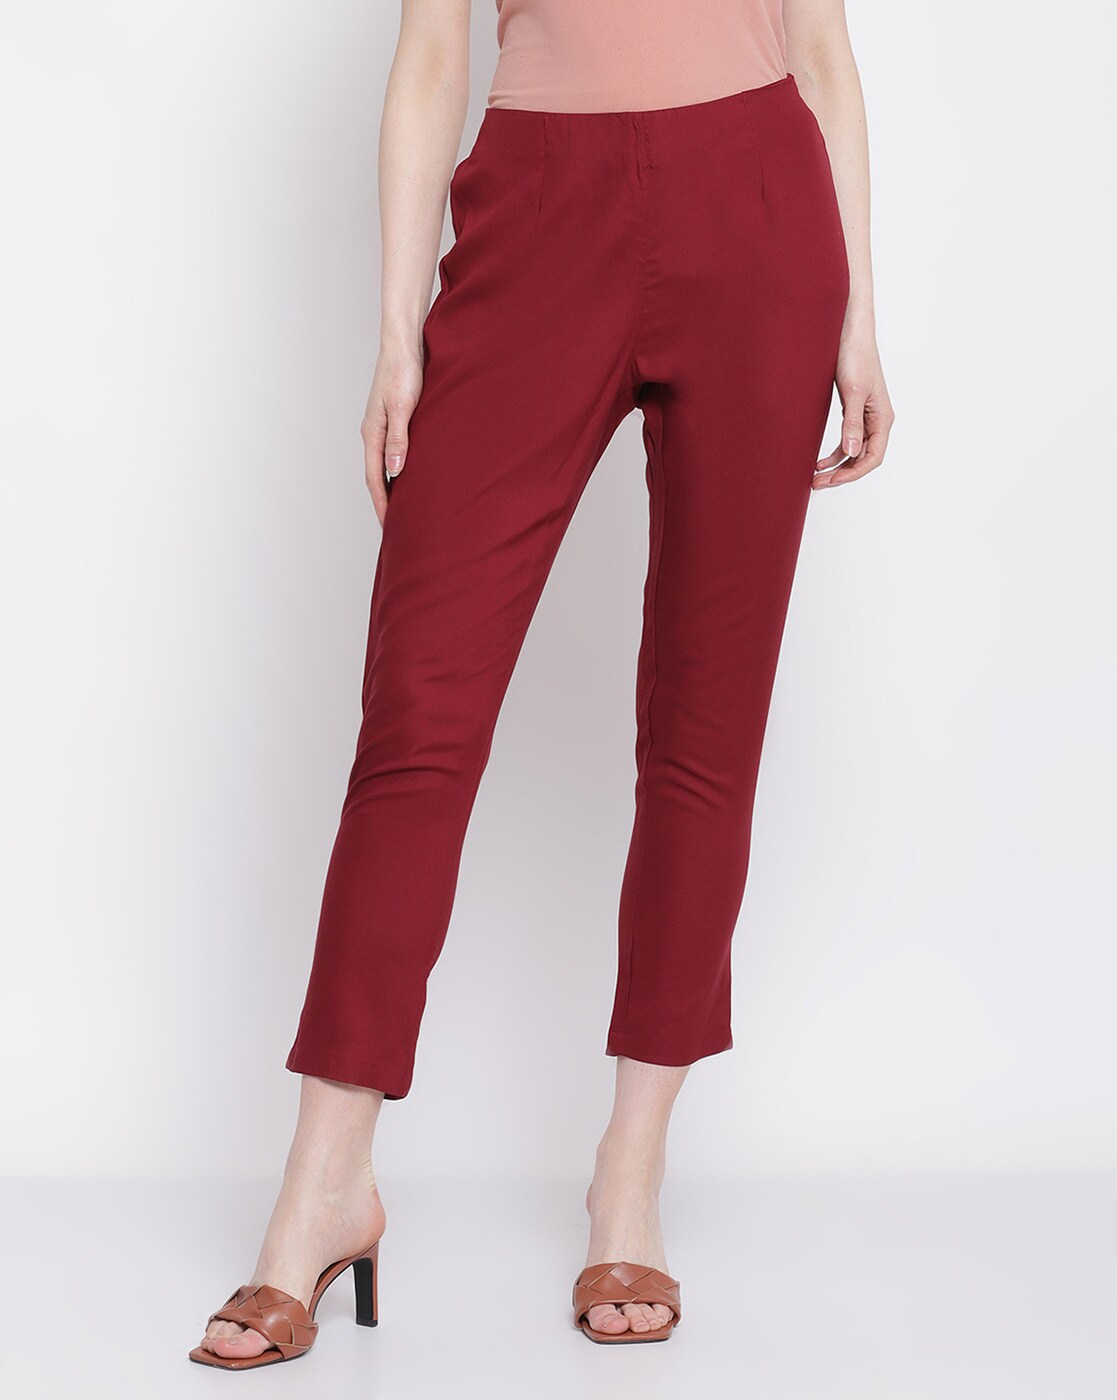 SUICK Burgundy Pants Spring and Autumn Style New Thin Ankle Pants Womens  Pencil High Waist Long Womens Casual Slim Pants Color  Hortel Size   XXL Buy Online at Best Price in